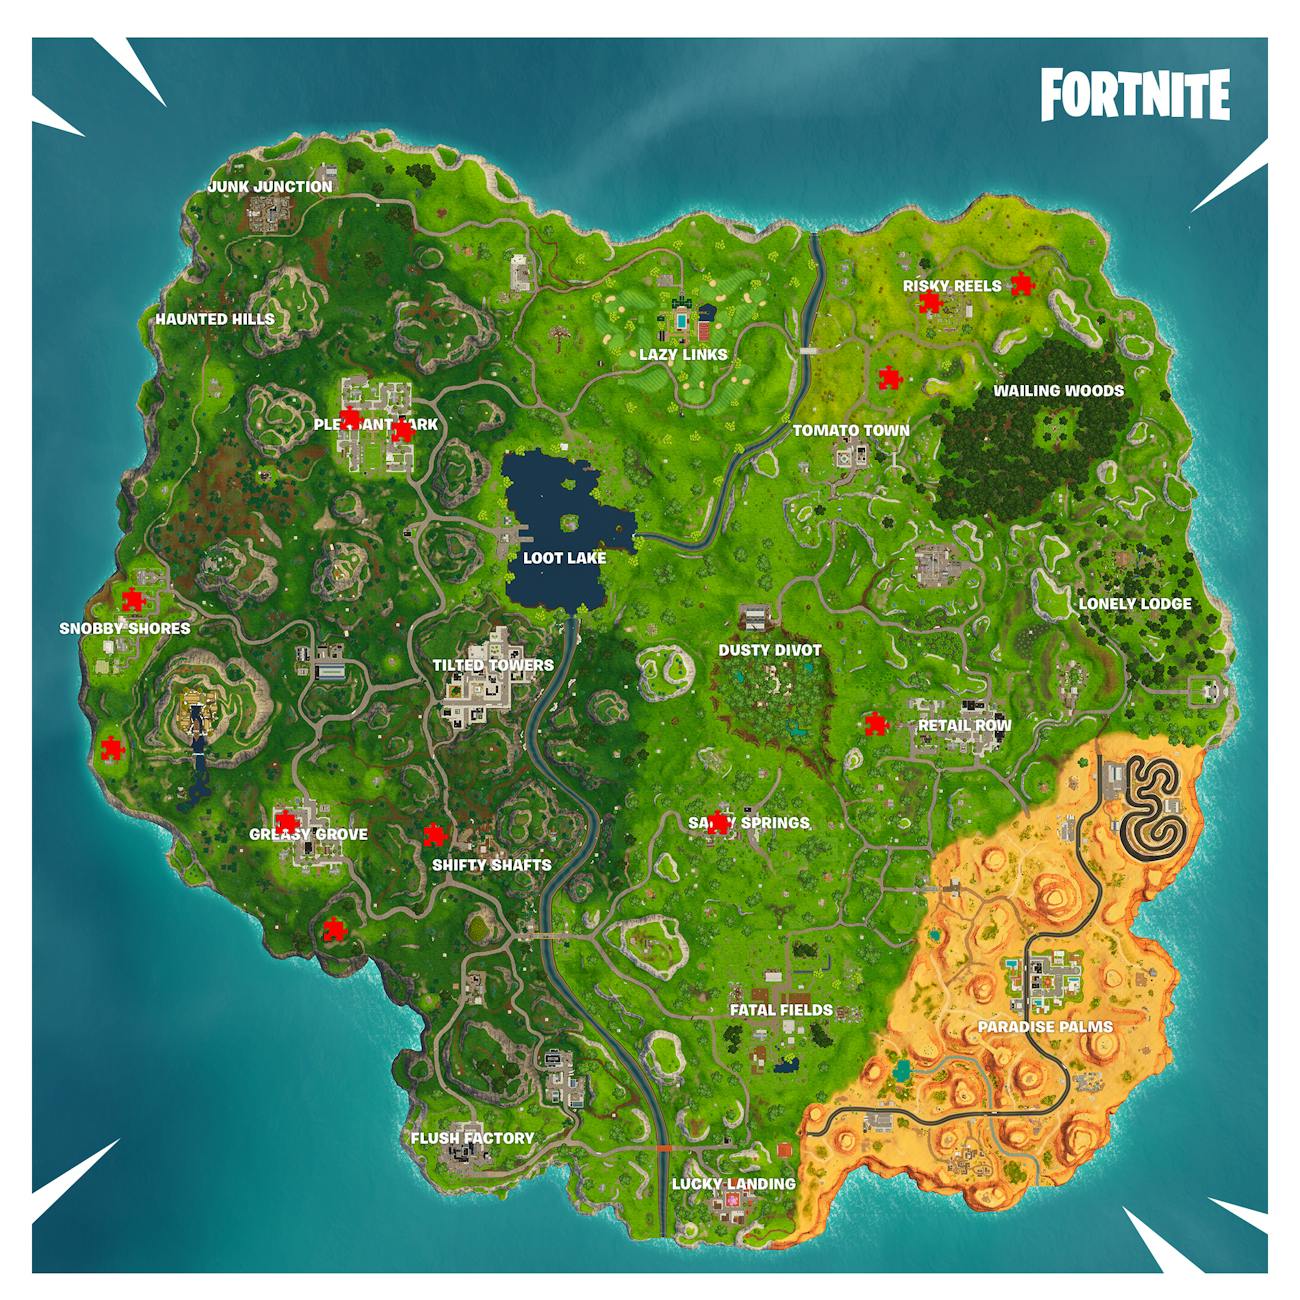 Fortnite Jigsaw Puzzle Pieces Locations In Basements Map And Video - fortnite jigsaw puzzle pieces locations